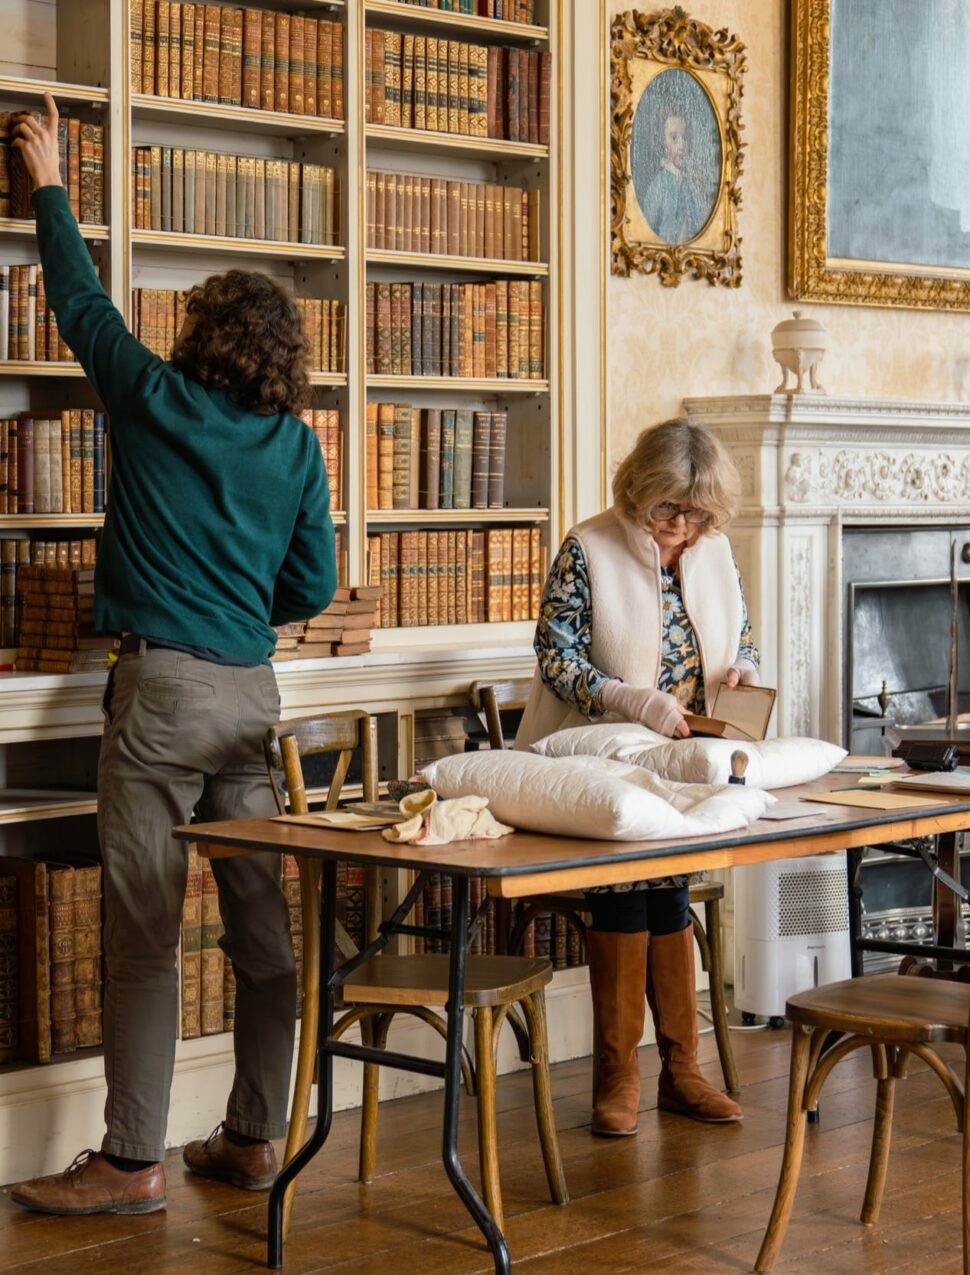 A man removes books from a shelf whilst a woman inspects them on a table in a library at Powderham Castle